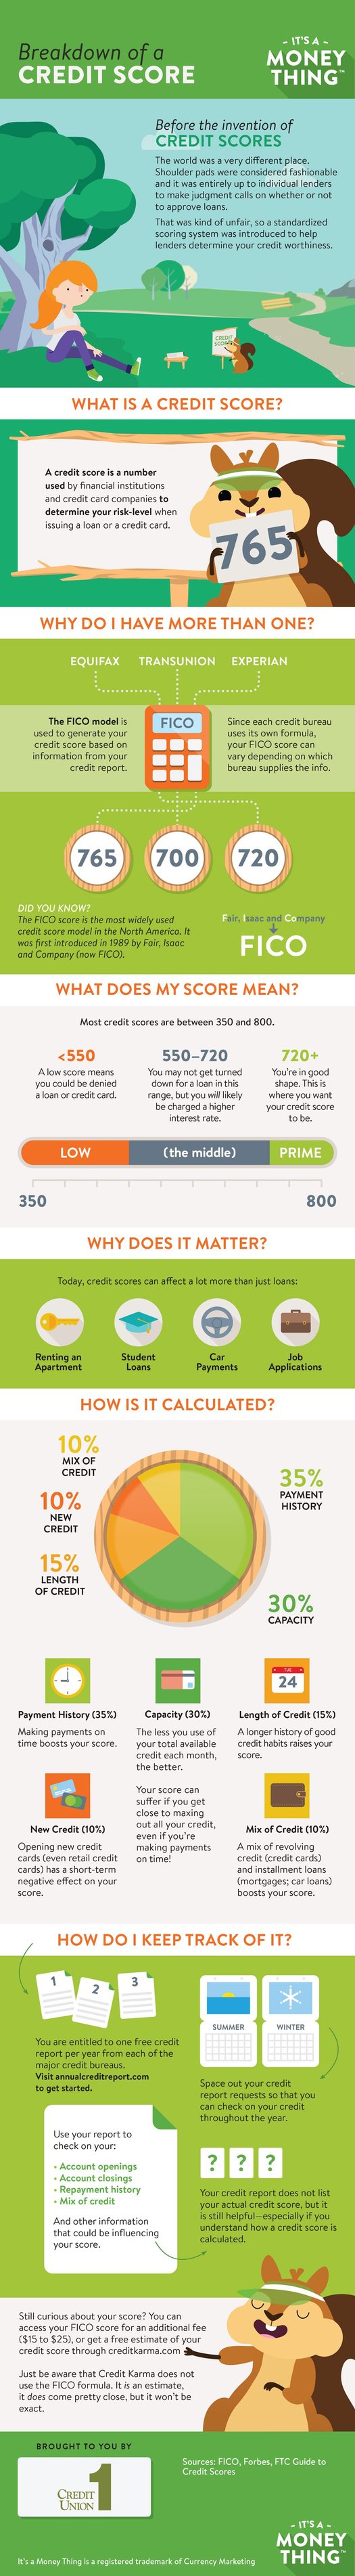 Infographic: Breakdown of a Credit Score